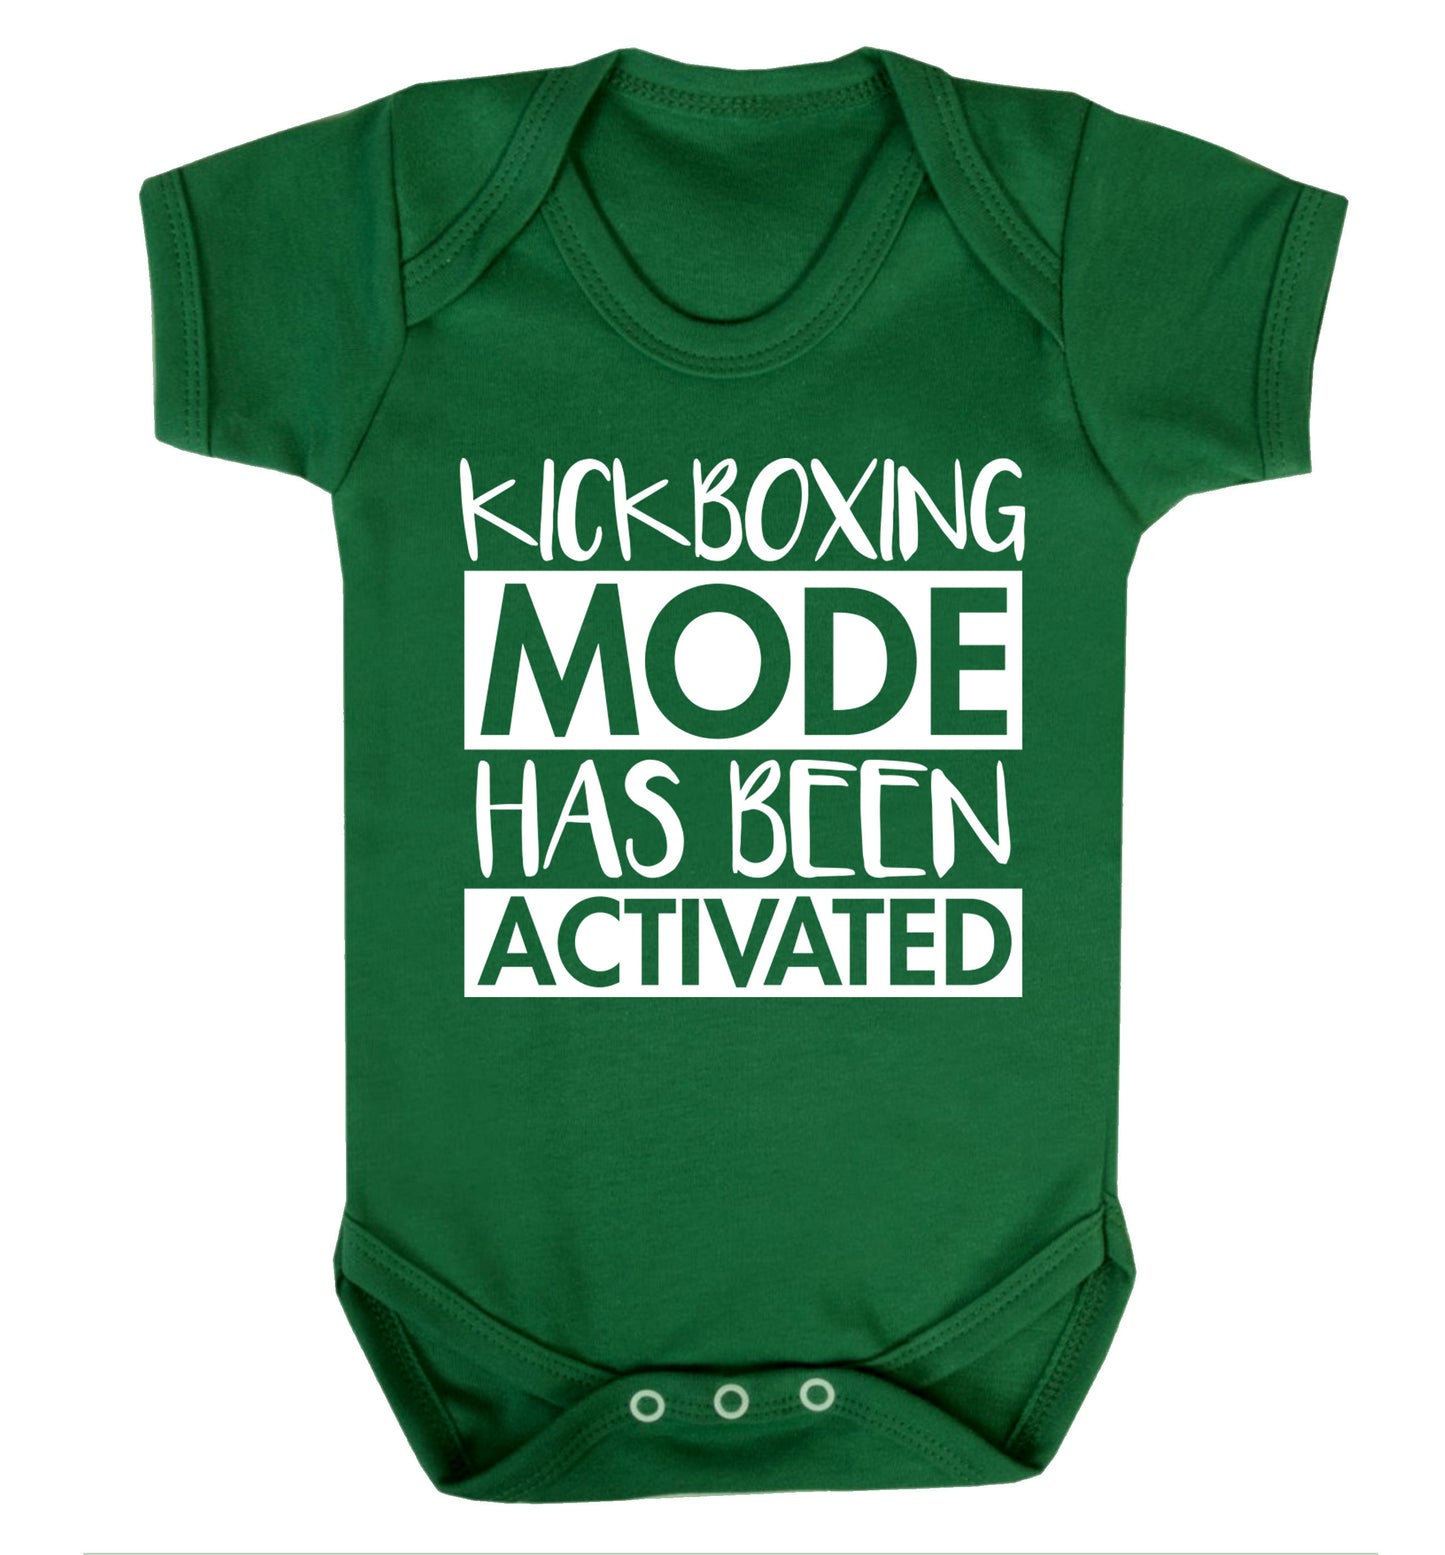 Kickboxing mode activated Baby Vest green 18-24 months